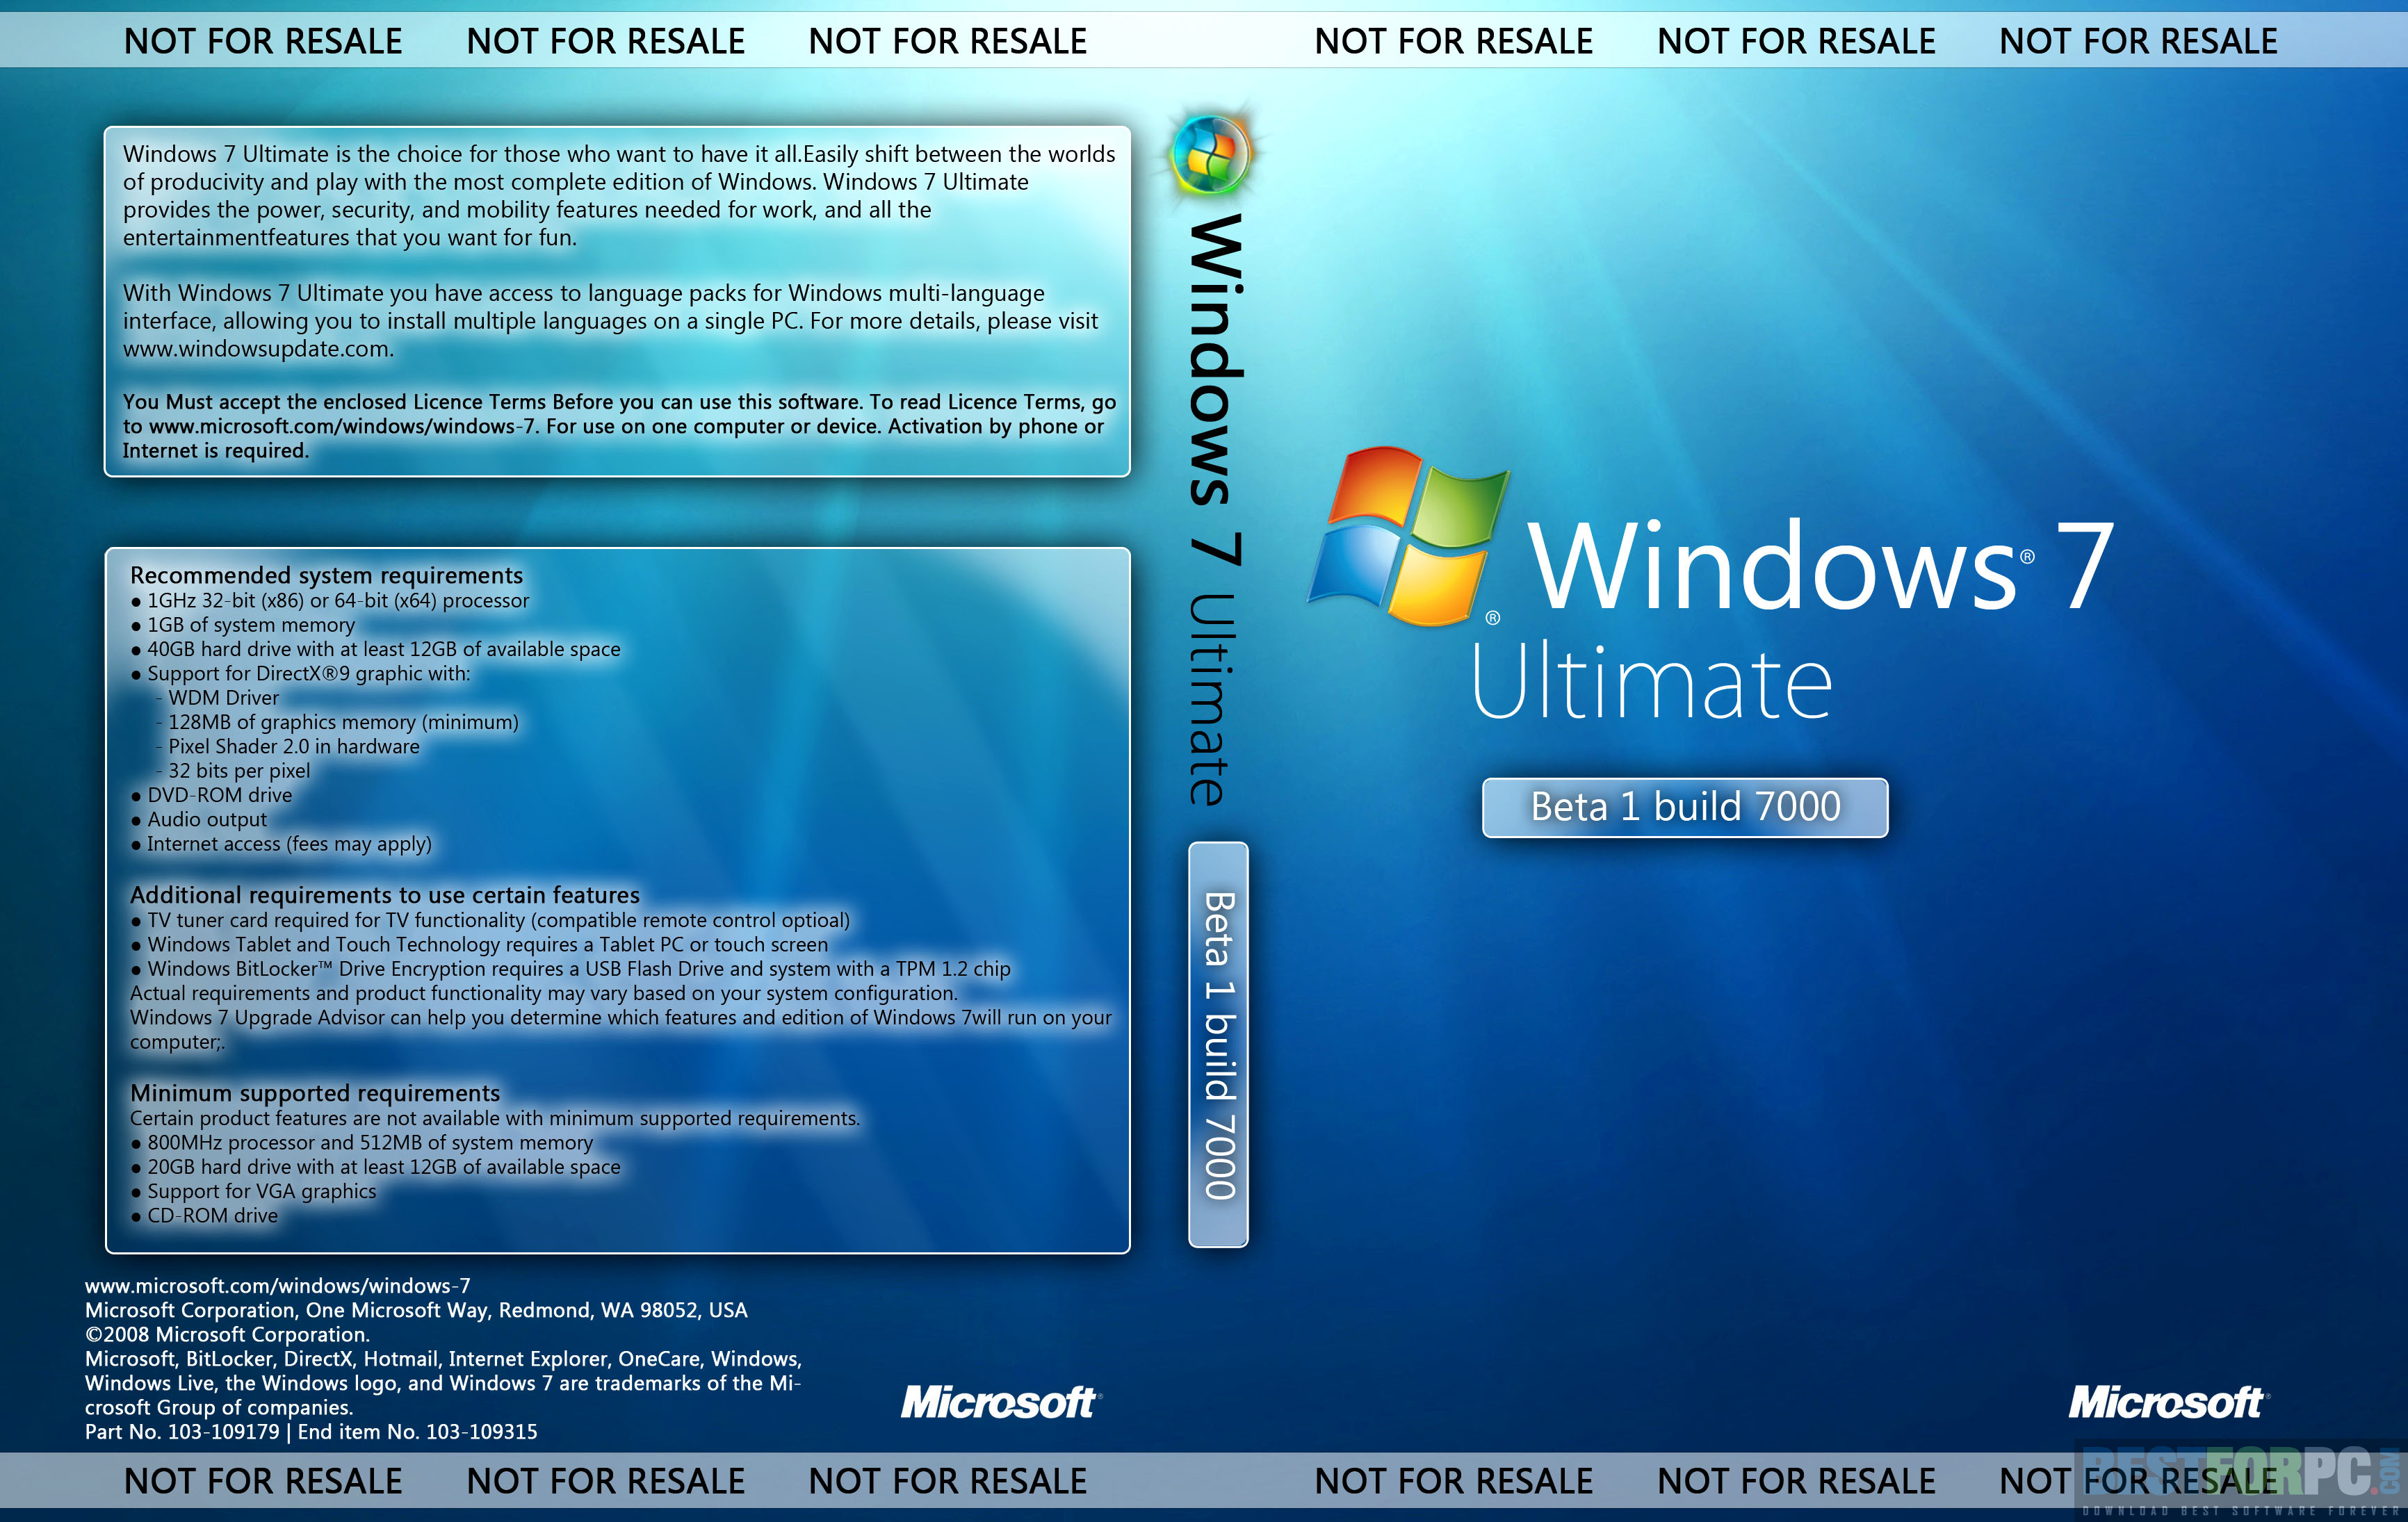 windows 7 gamer edition x64 iso download single link